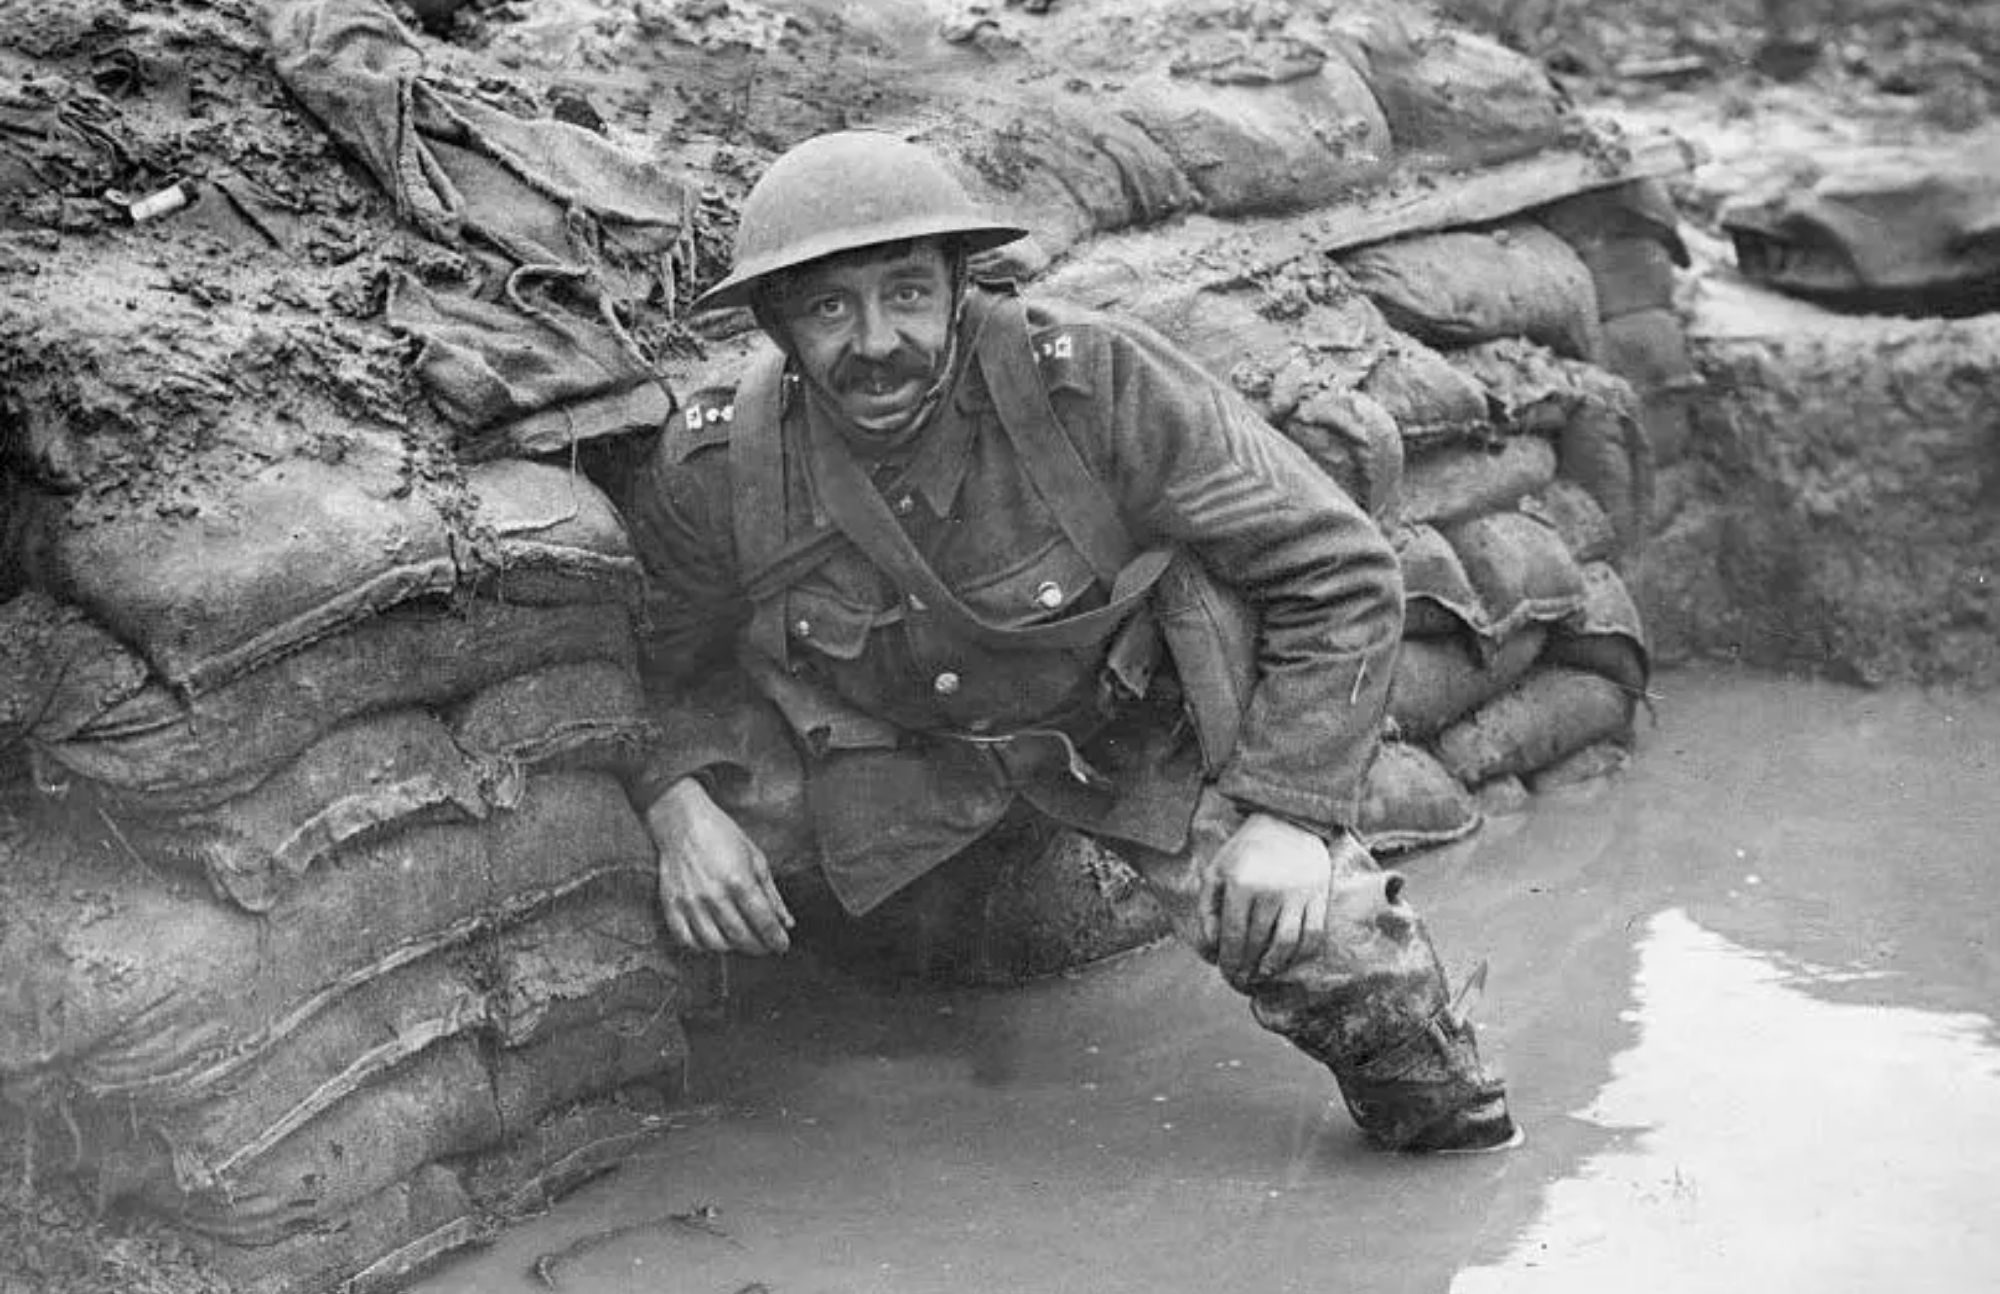 Soldier wearing a hard hat with his feet submerged in mud and water